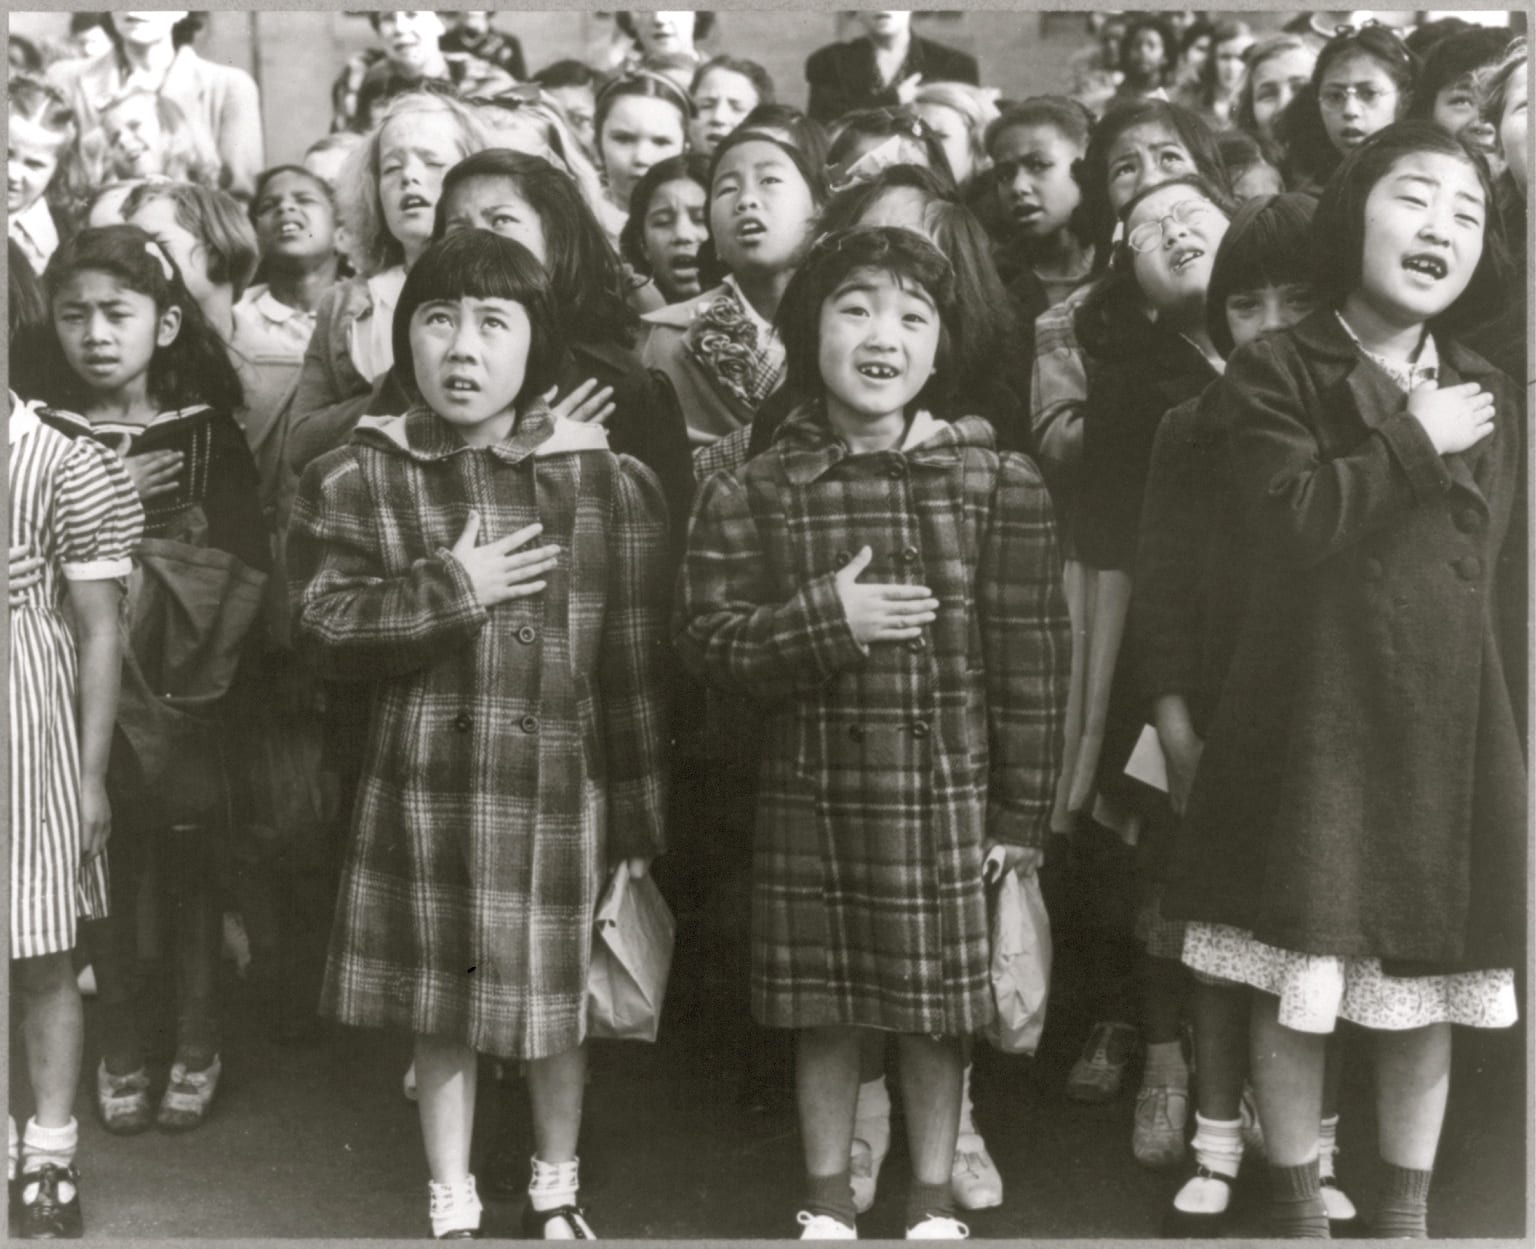 Japanese-American children at concentration camp pledging to the USA's flag